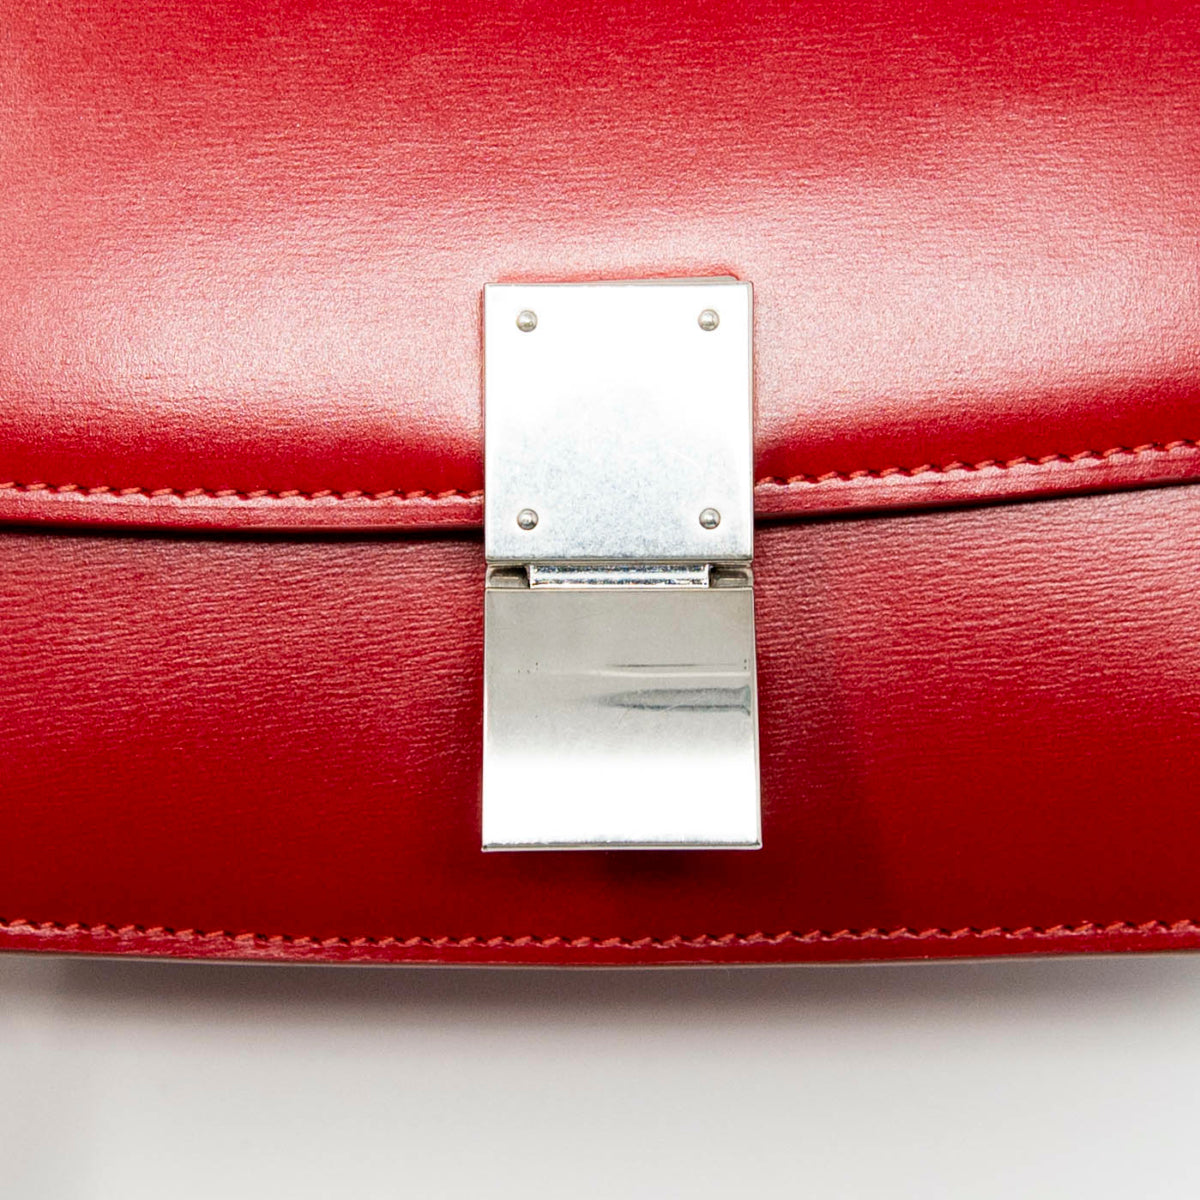 Celine Red Small Box Bag